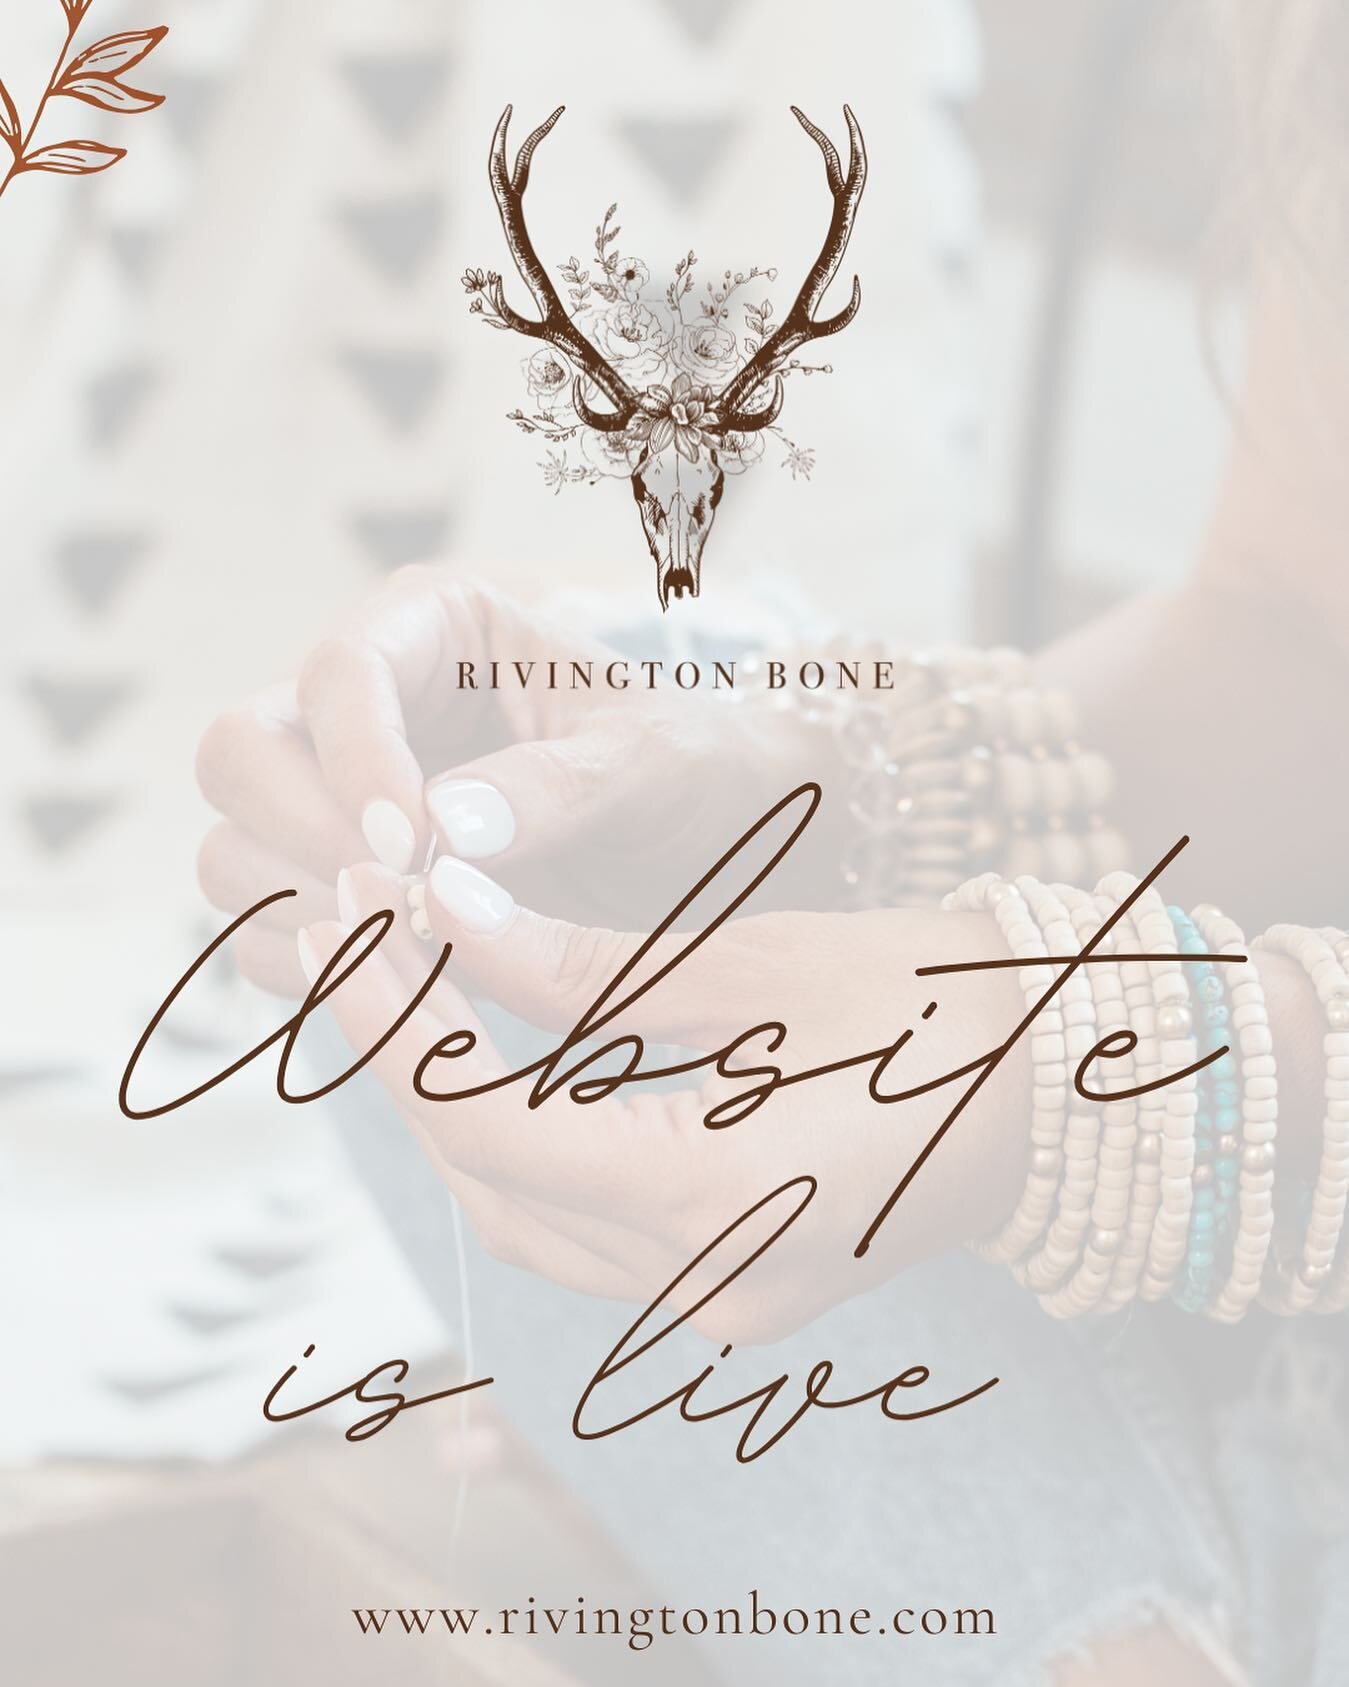 Hey guys!! 🤎🤎🤎

I can&rsquo;t believe I&rsquo;m finally saying this ➡️ My website is live!!✨✨✨ Whew!😅 This has been such a long-time coming and such a big accomplishment for my little hobby-turned-business! 

I could not have done this without th